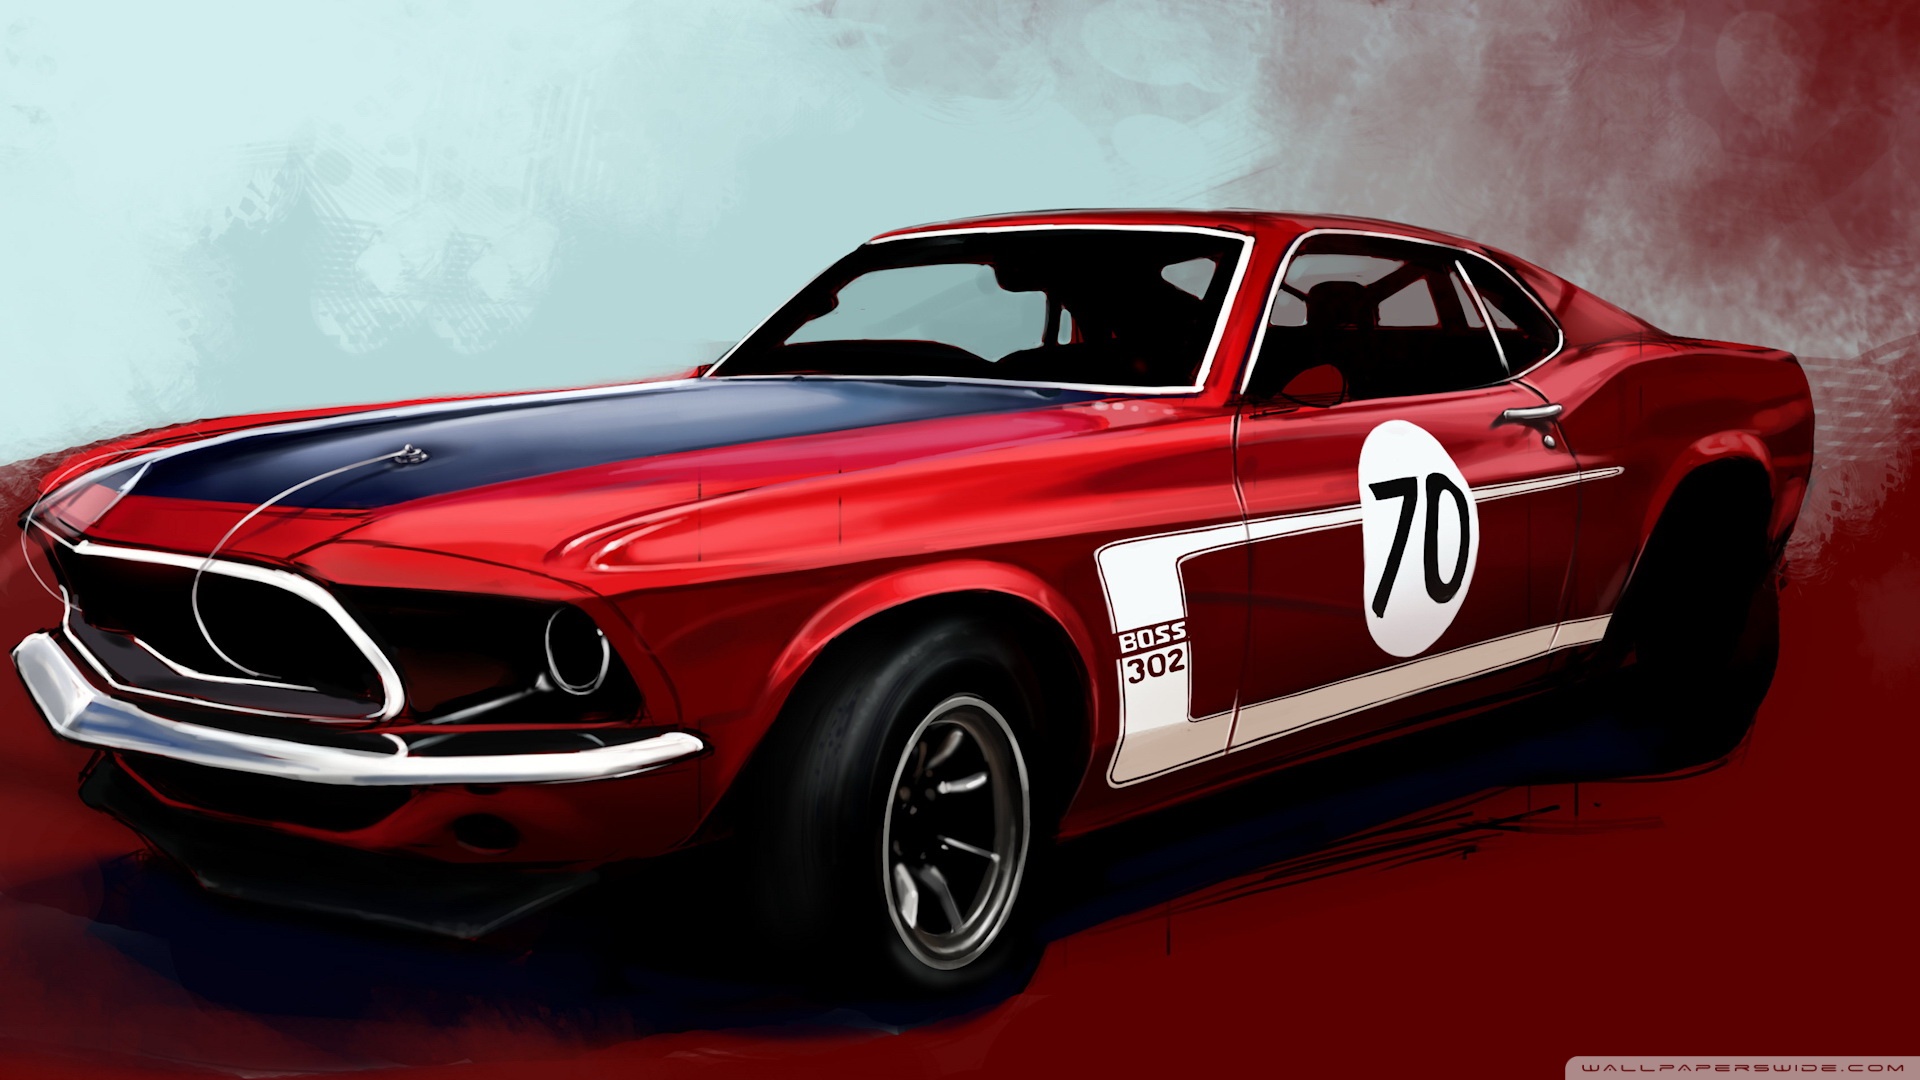 Ford Mustang Boss 302 Muscle Car Fastback Red Car 1920x1080